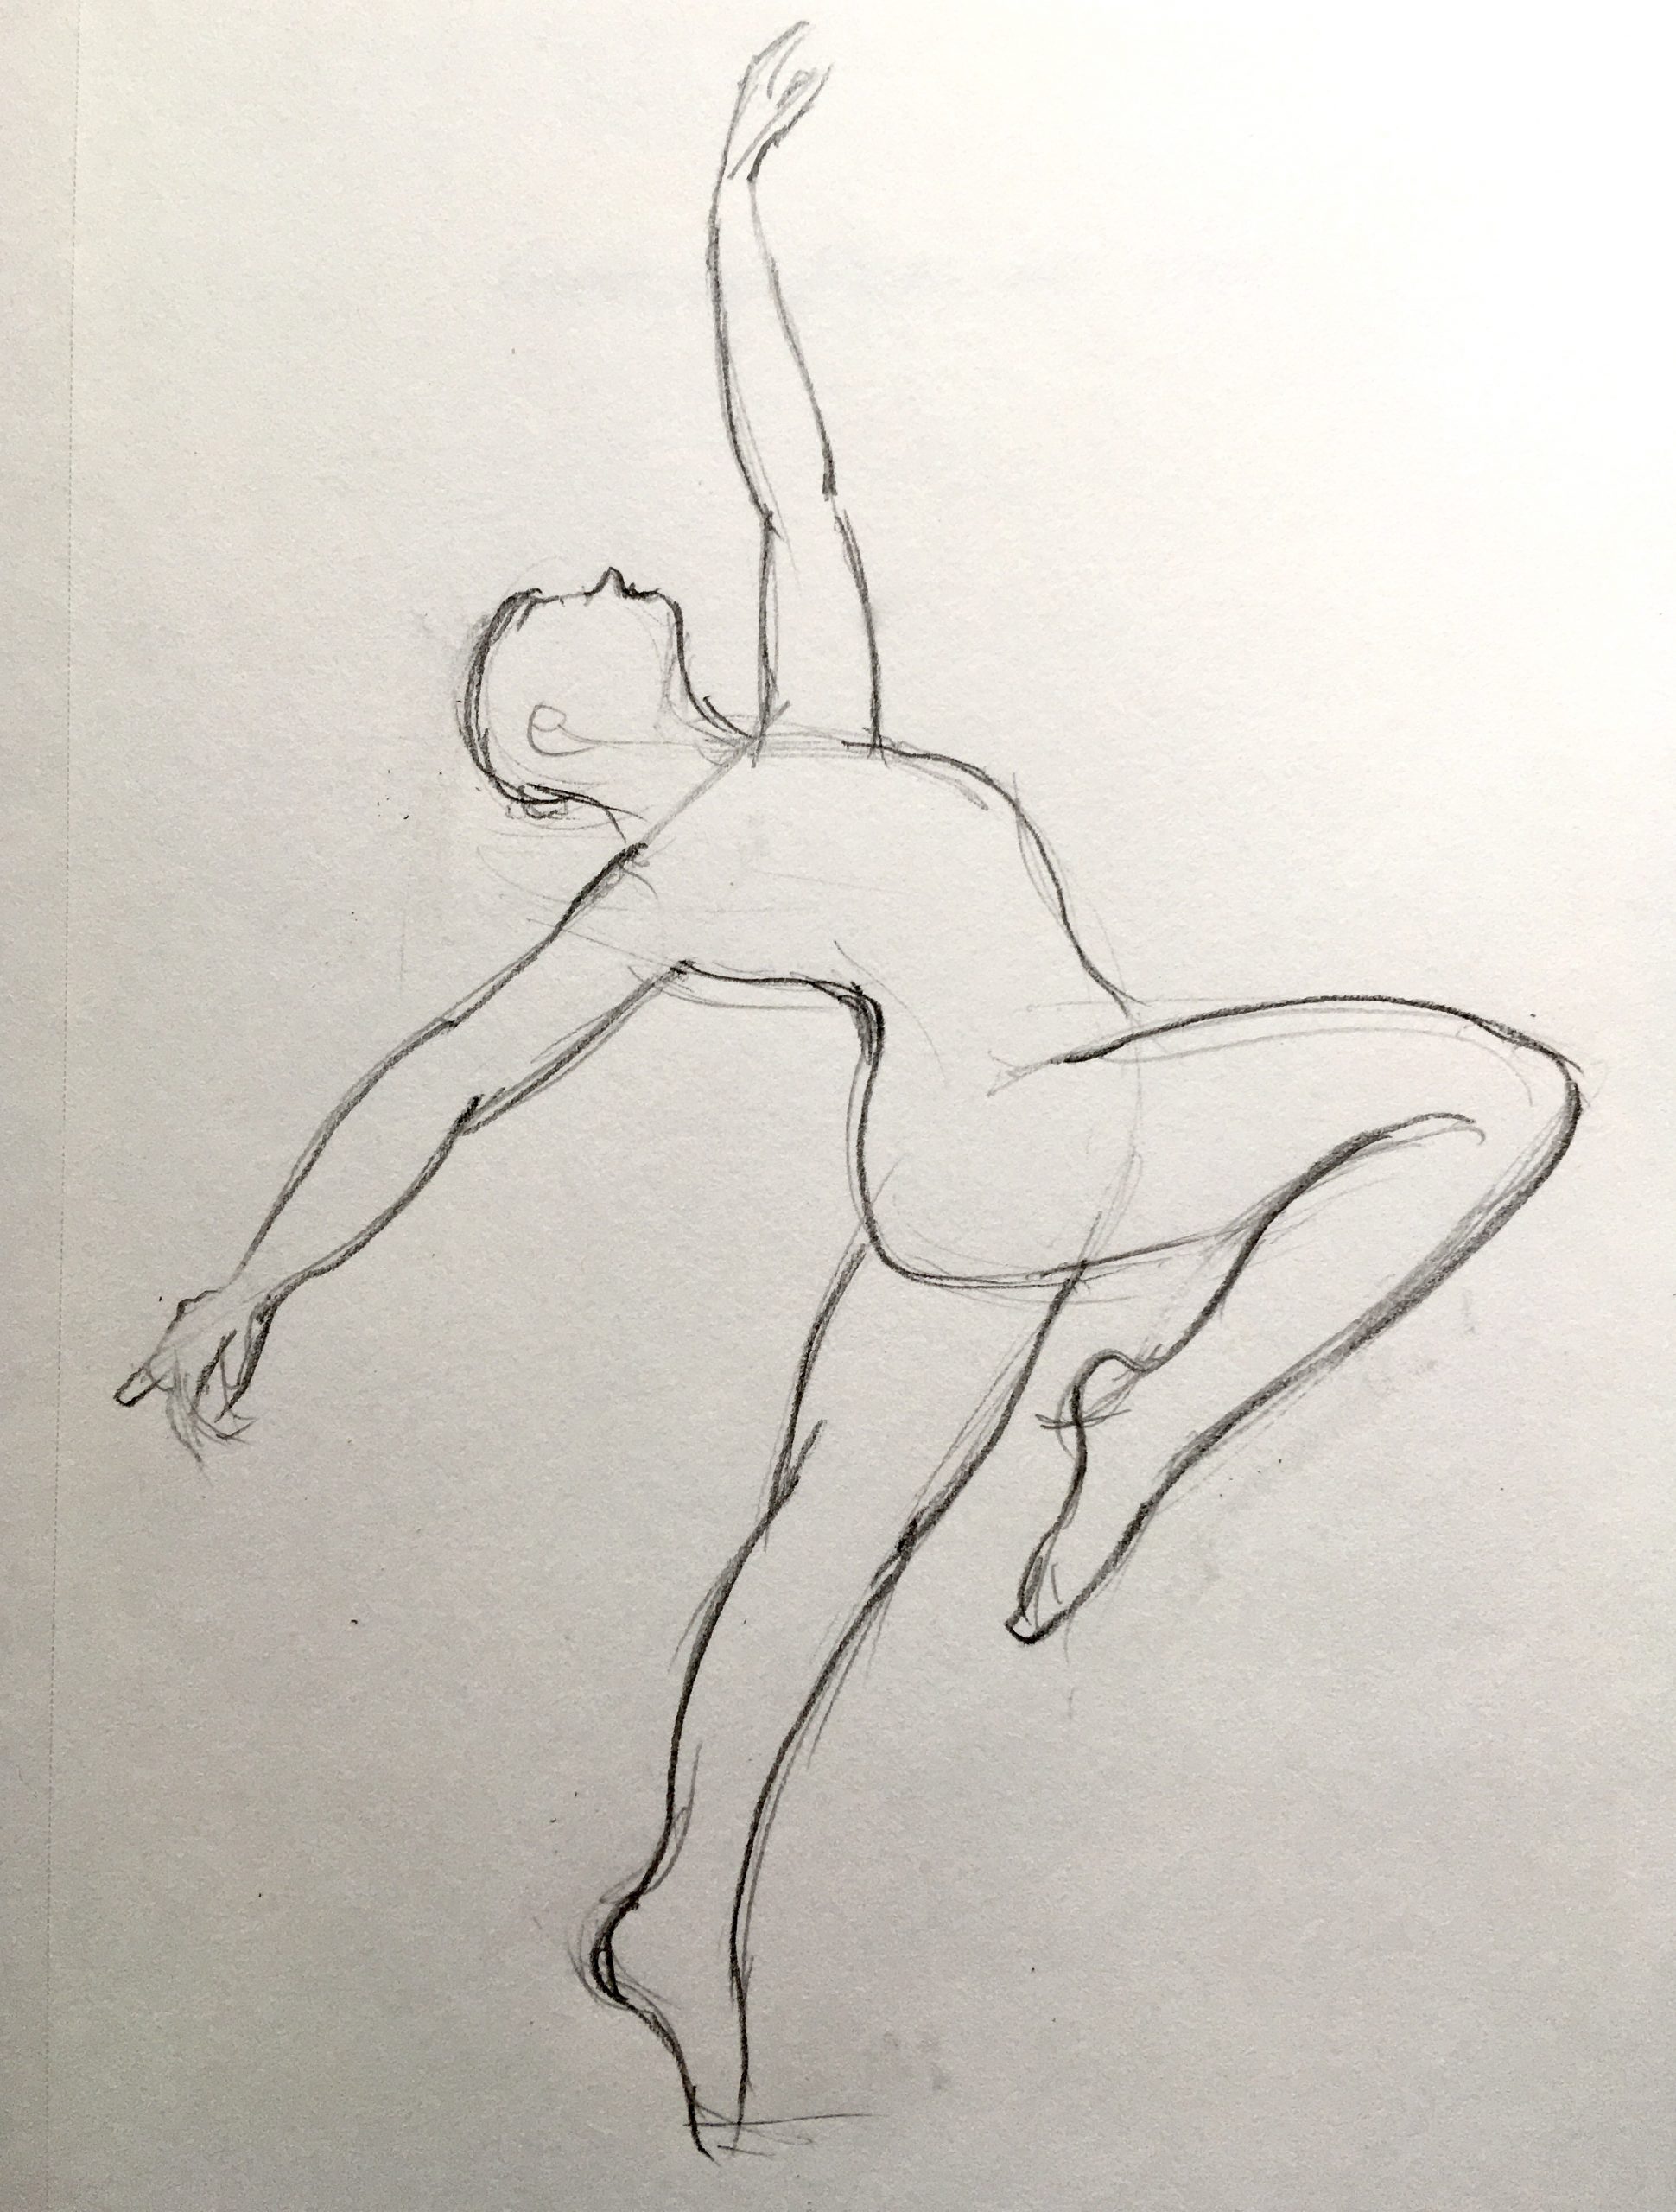 Gesture Drawing Practice by ArtistSaif on DeviantArt